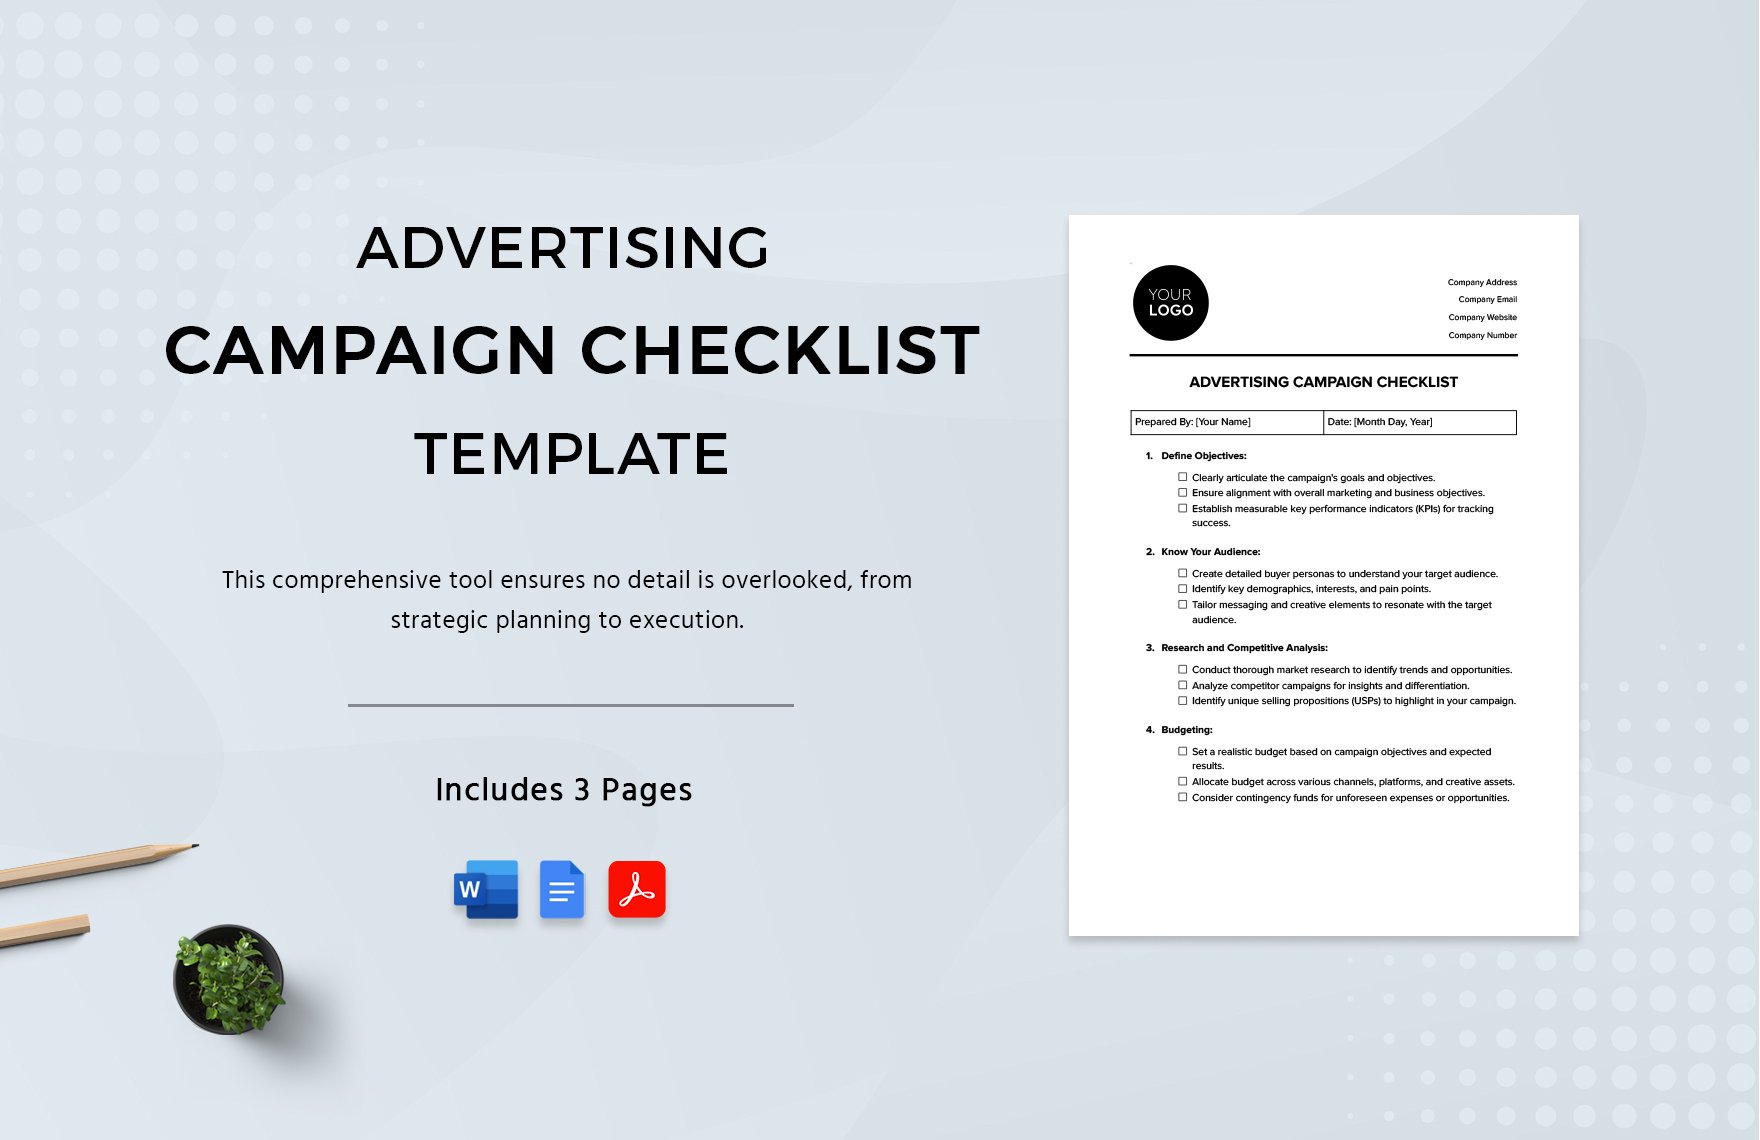 Advertising Campaign Checklist Template in Word, Google Docs, PDF